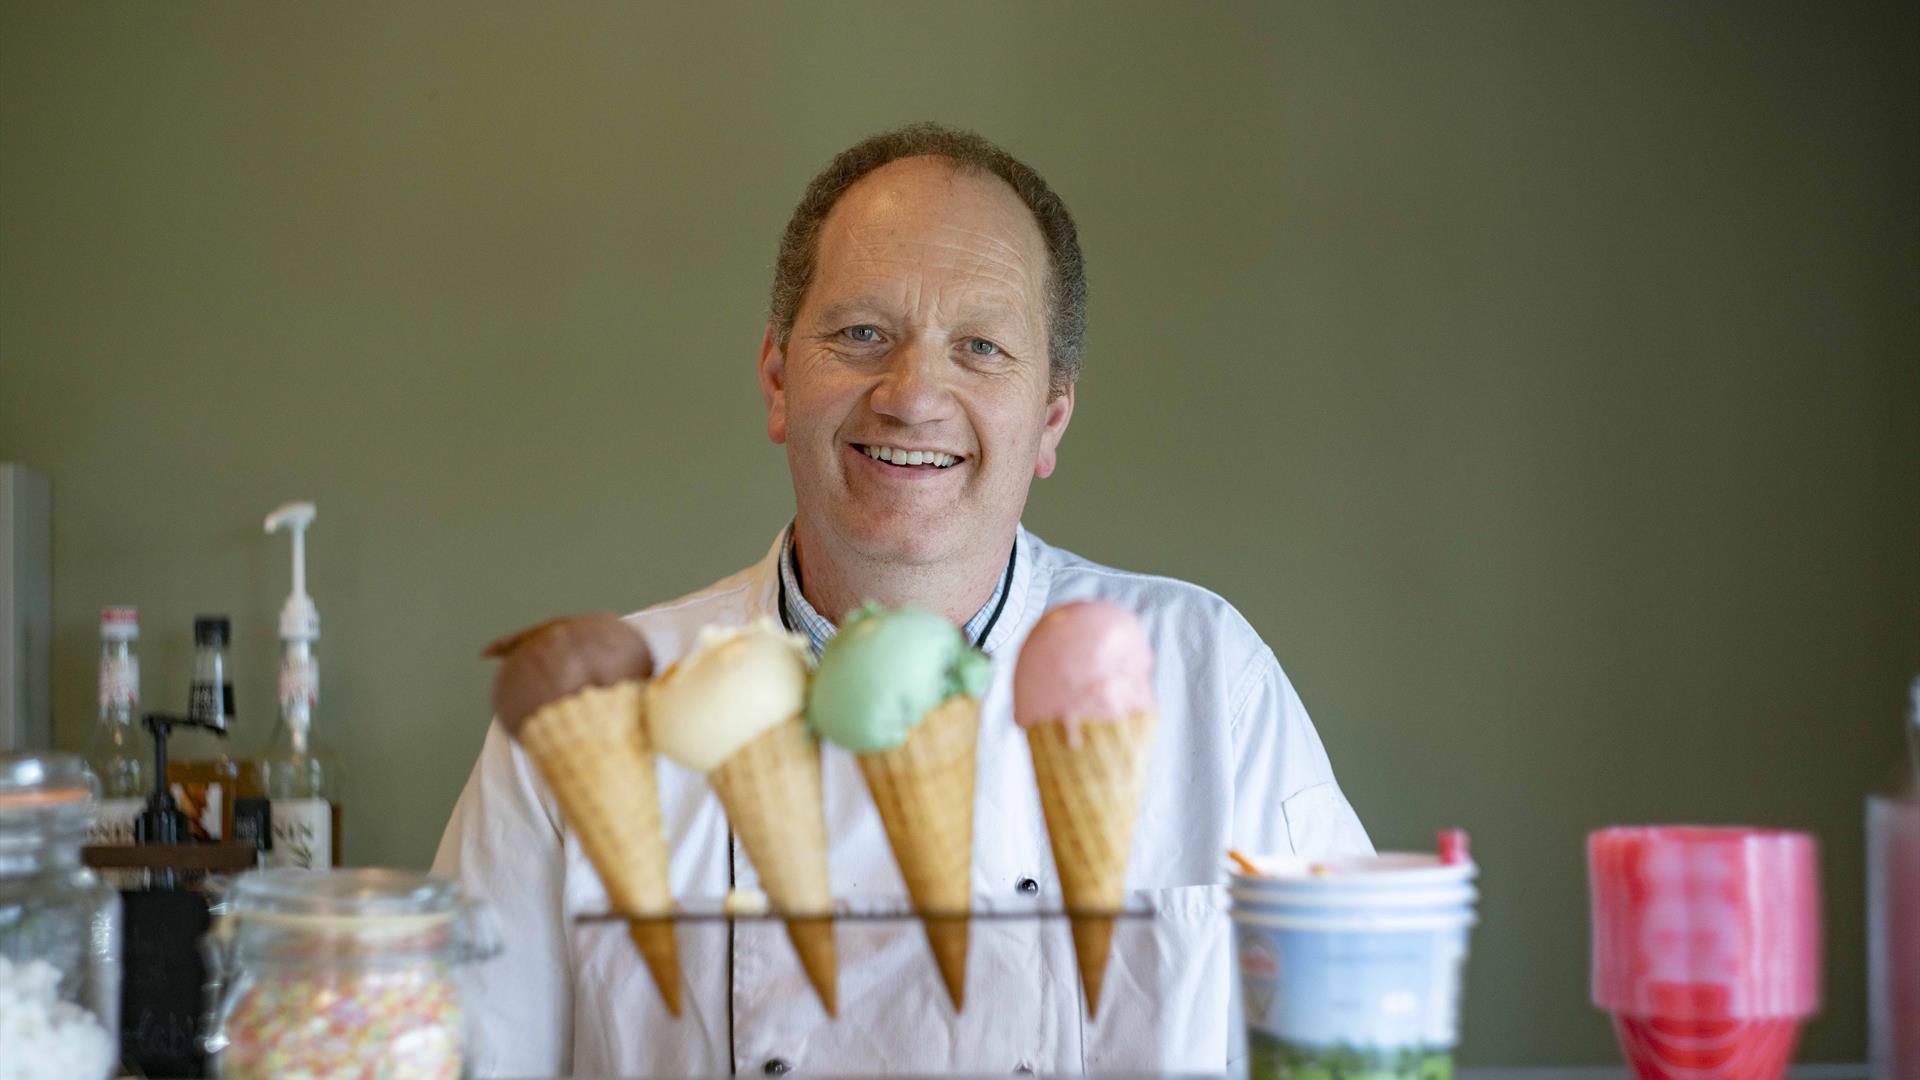 Man smiling standing in front of 4 different ice-creams.